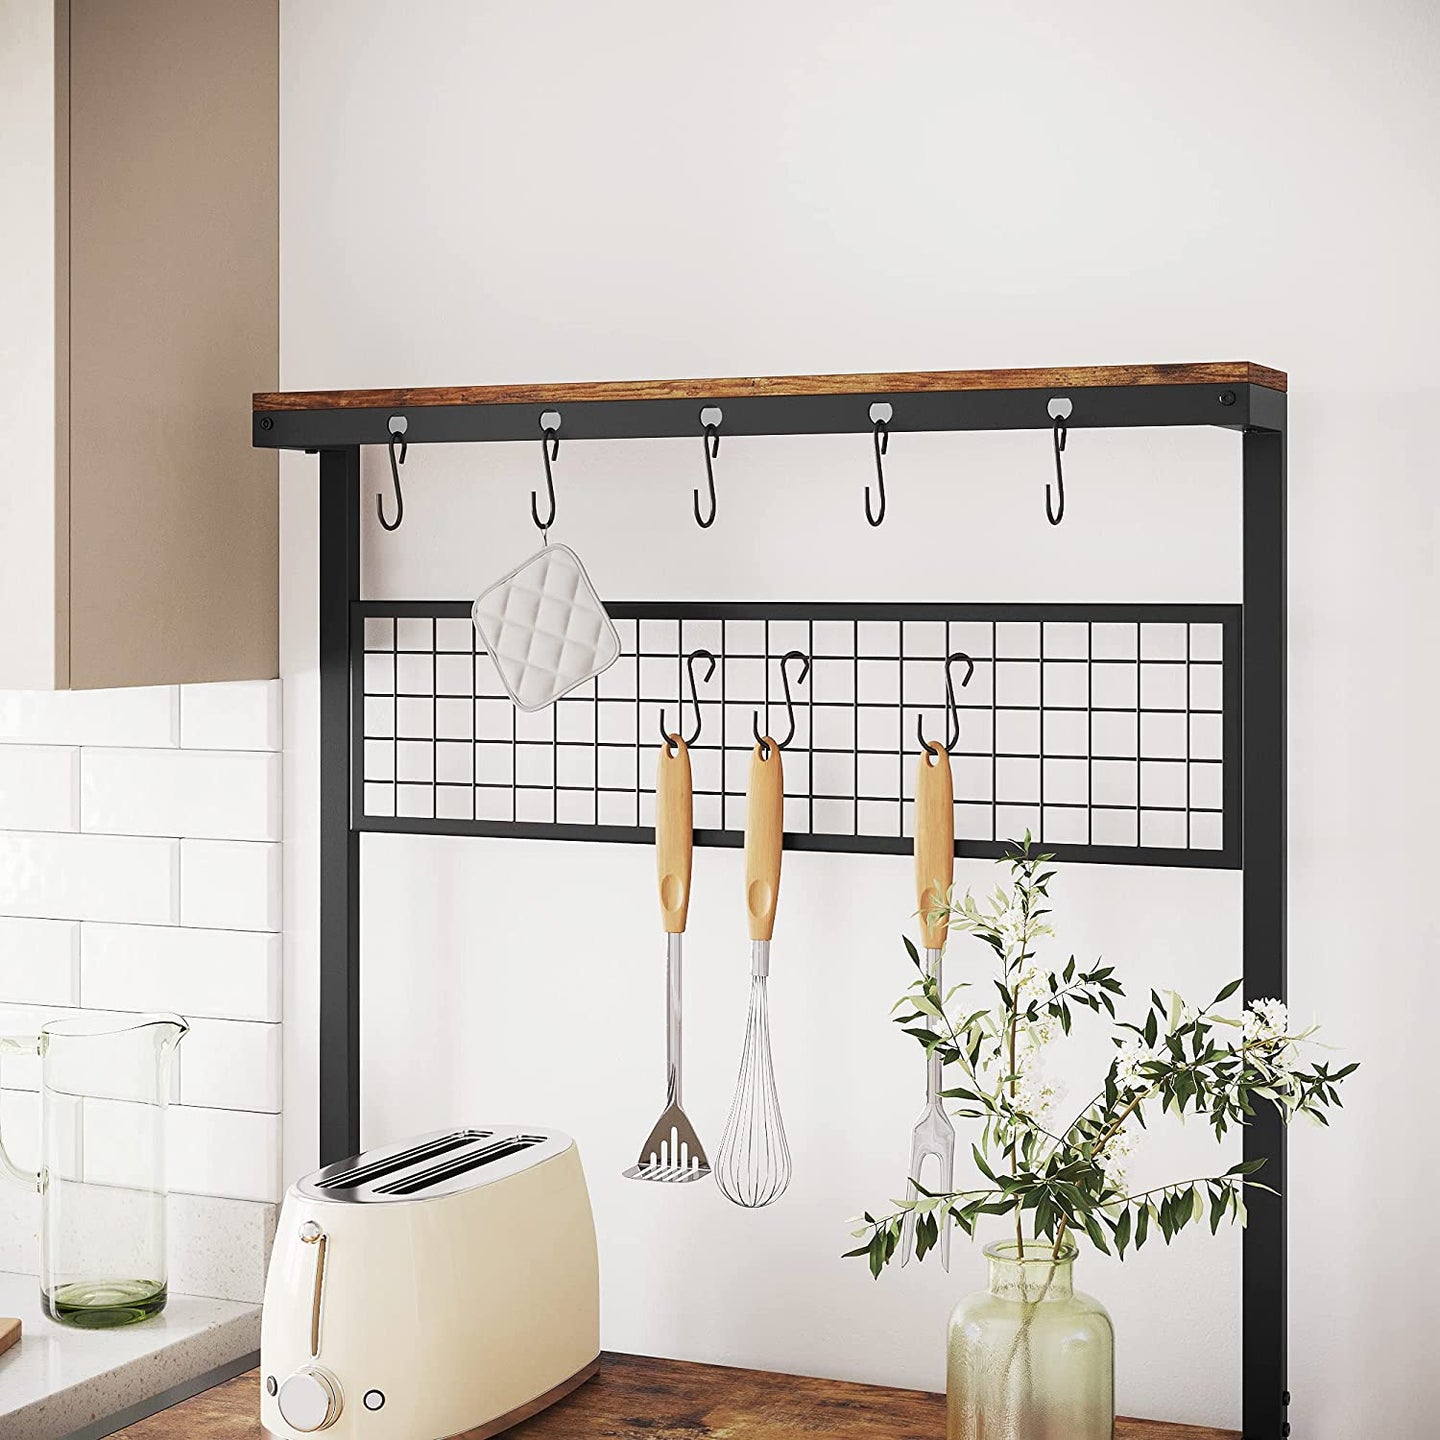 Industrial Kitchen Baker's Rack with Storage Shelves 10 Hooks and Metal Mesh Shelf 84 x 40 x 170 cm Rustic Brown - Delldesign Living - Furniture > Living Room - free-shipping